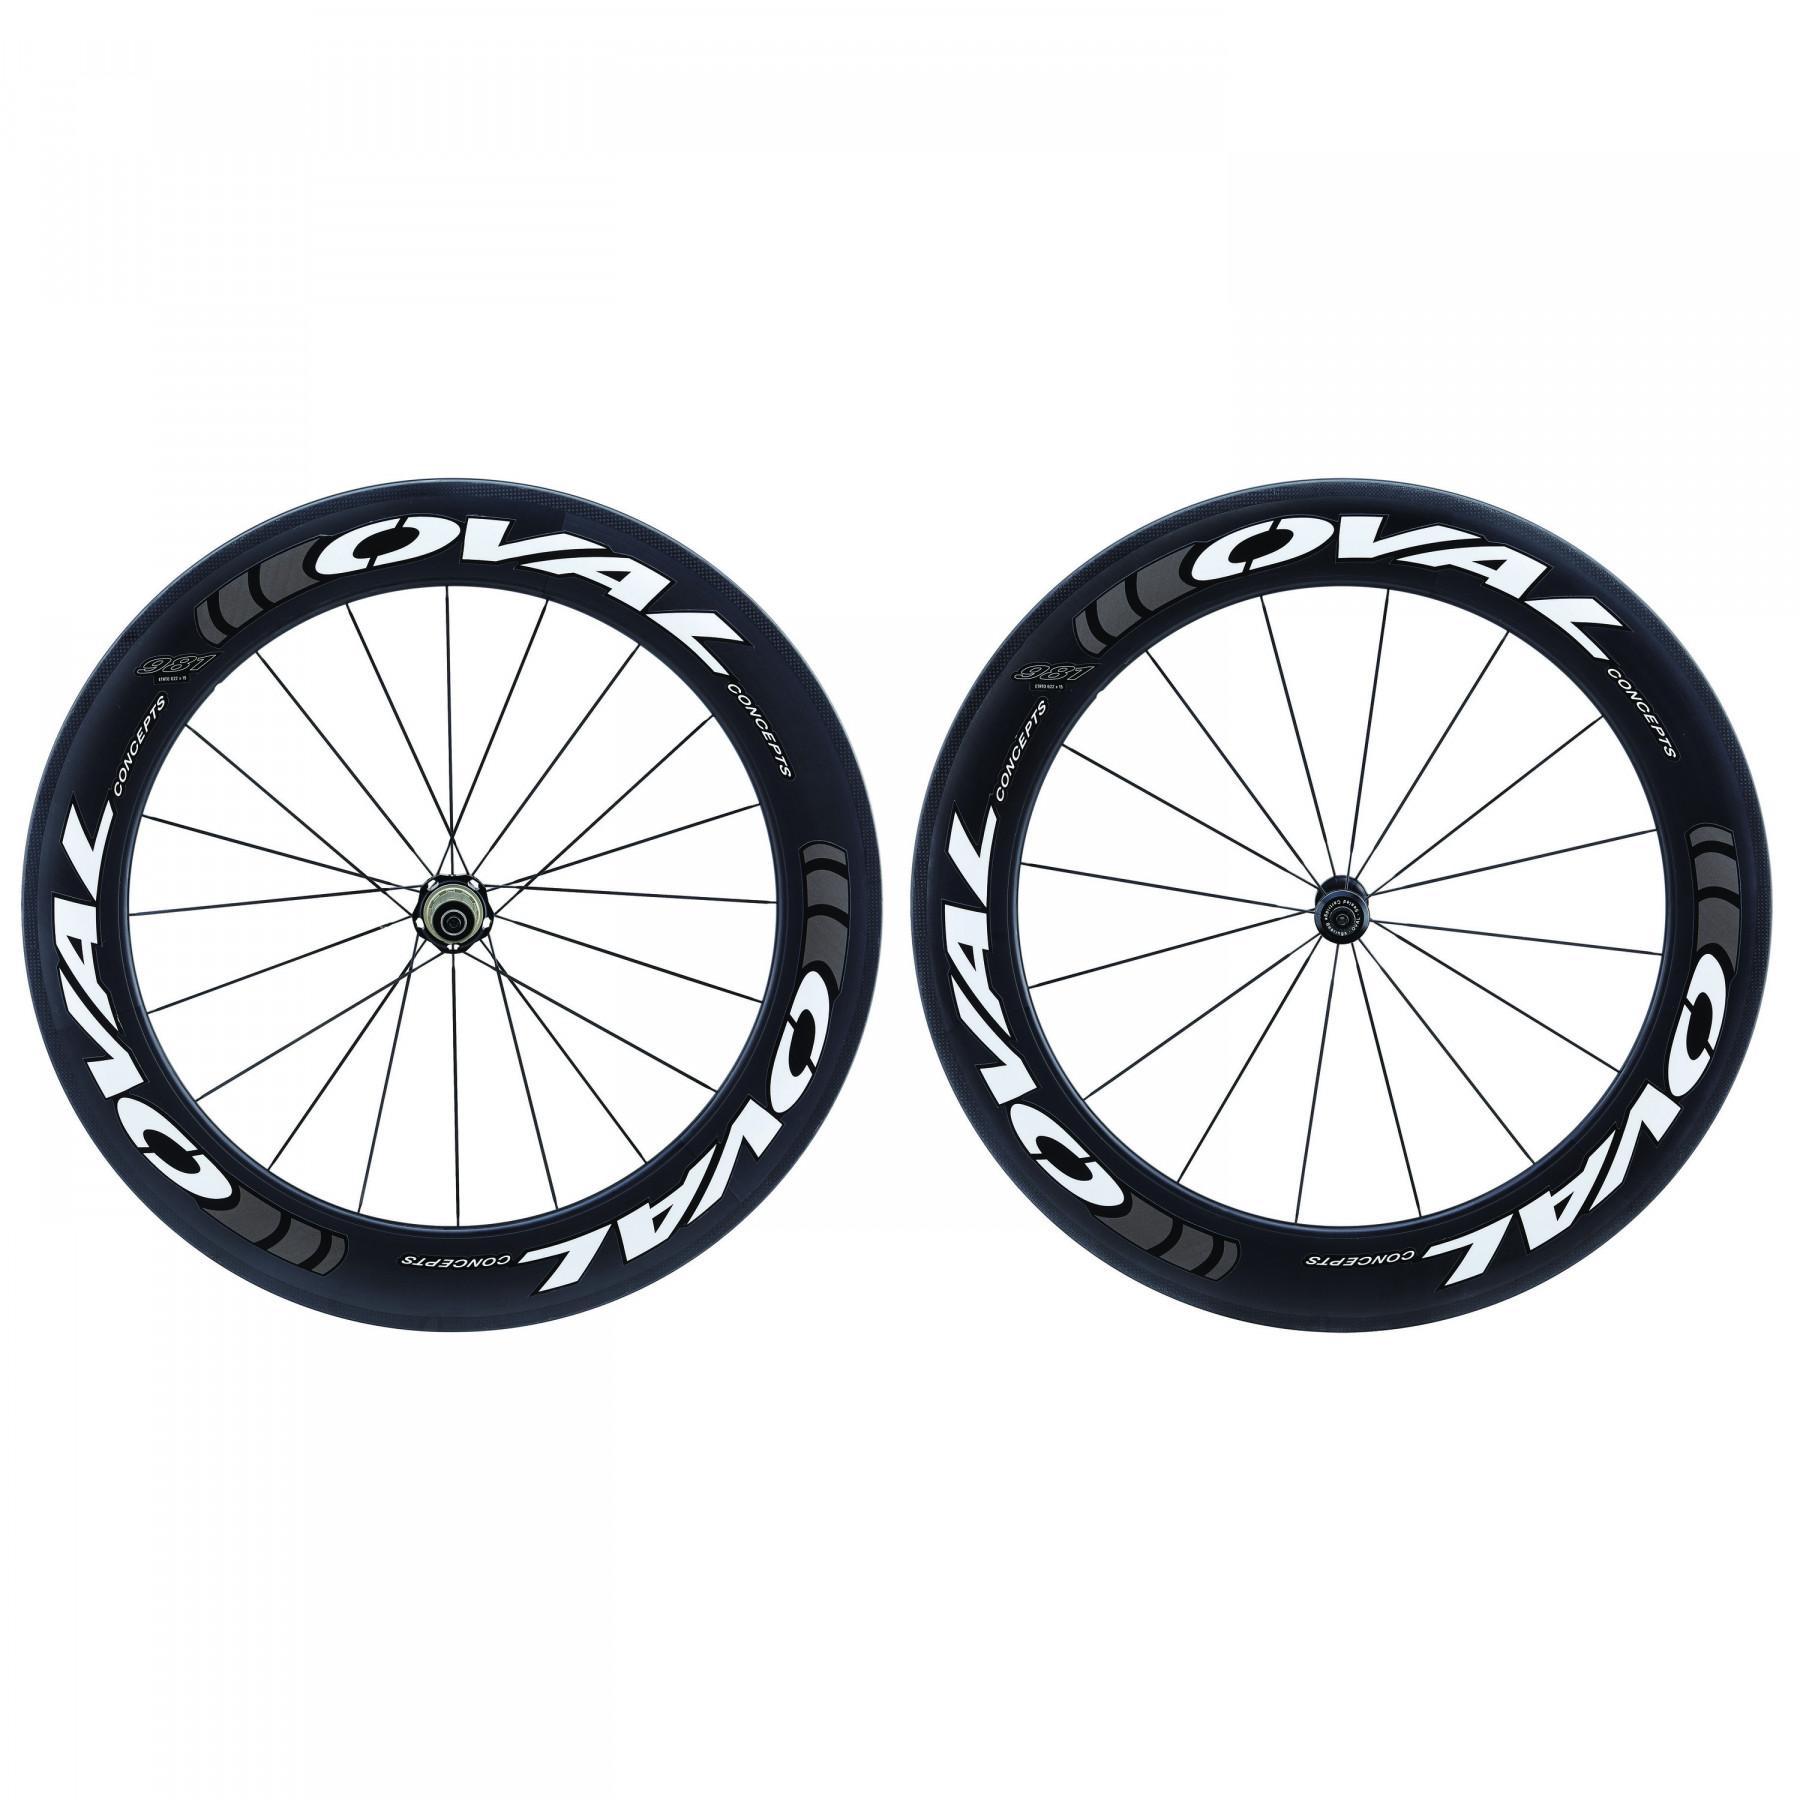 Wheels Oval concepts Oval 980 28 QR Clincher